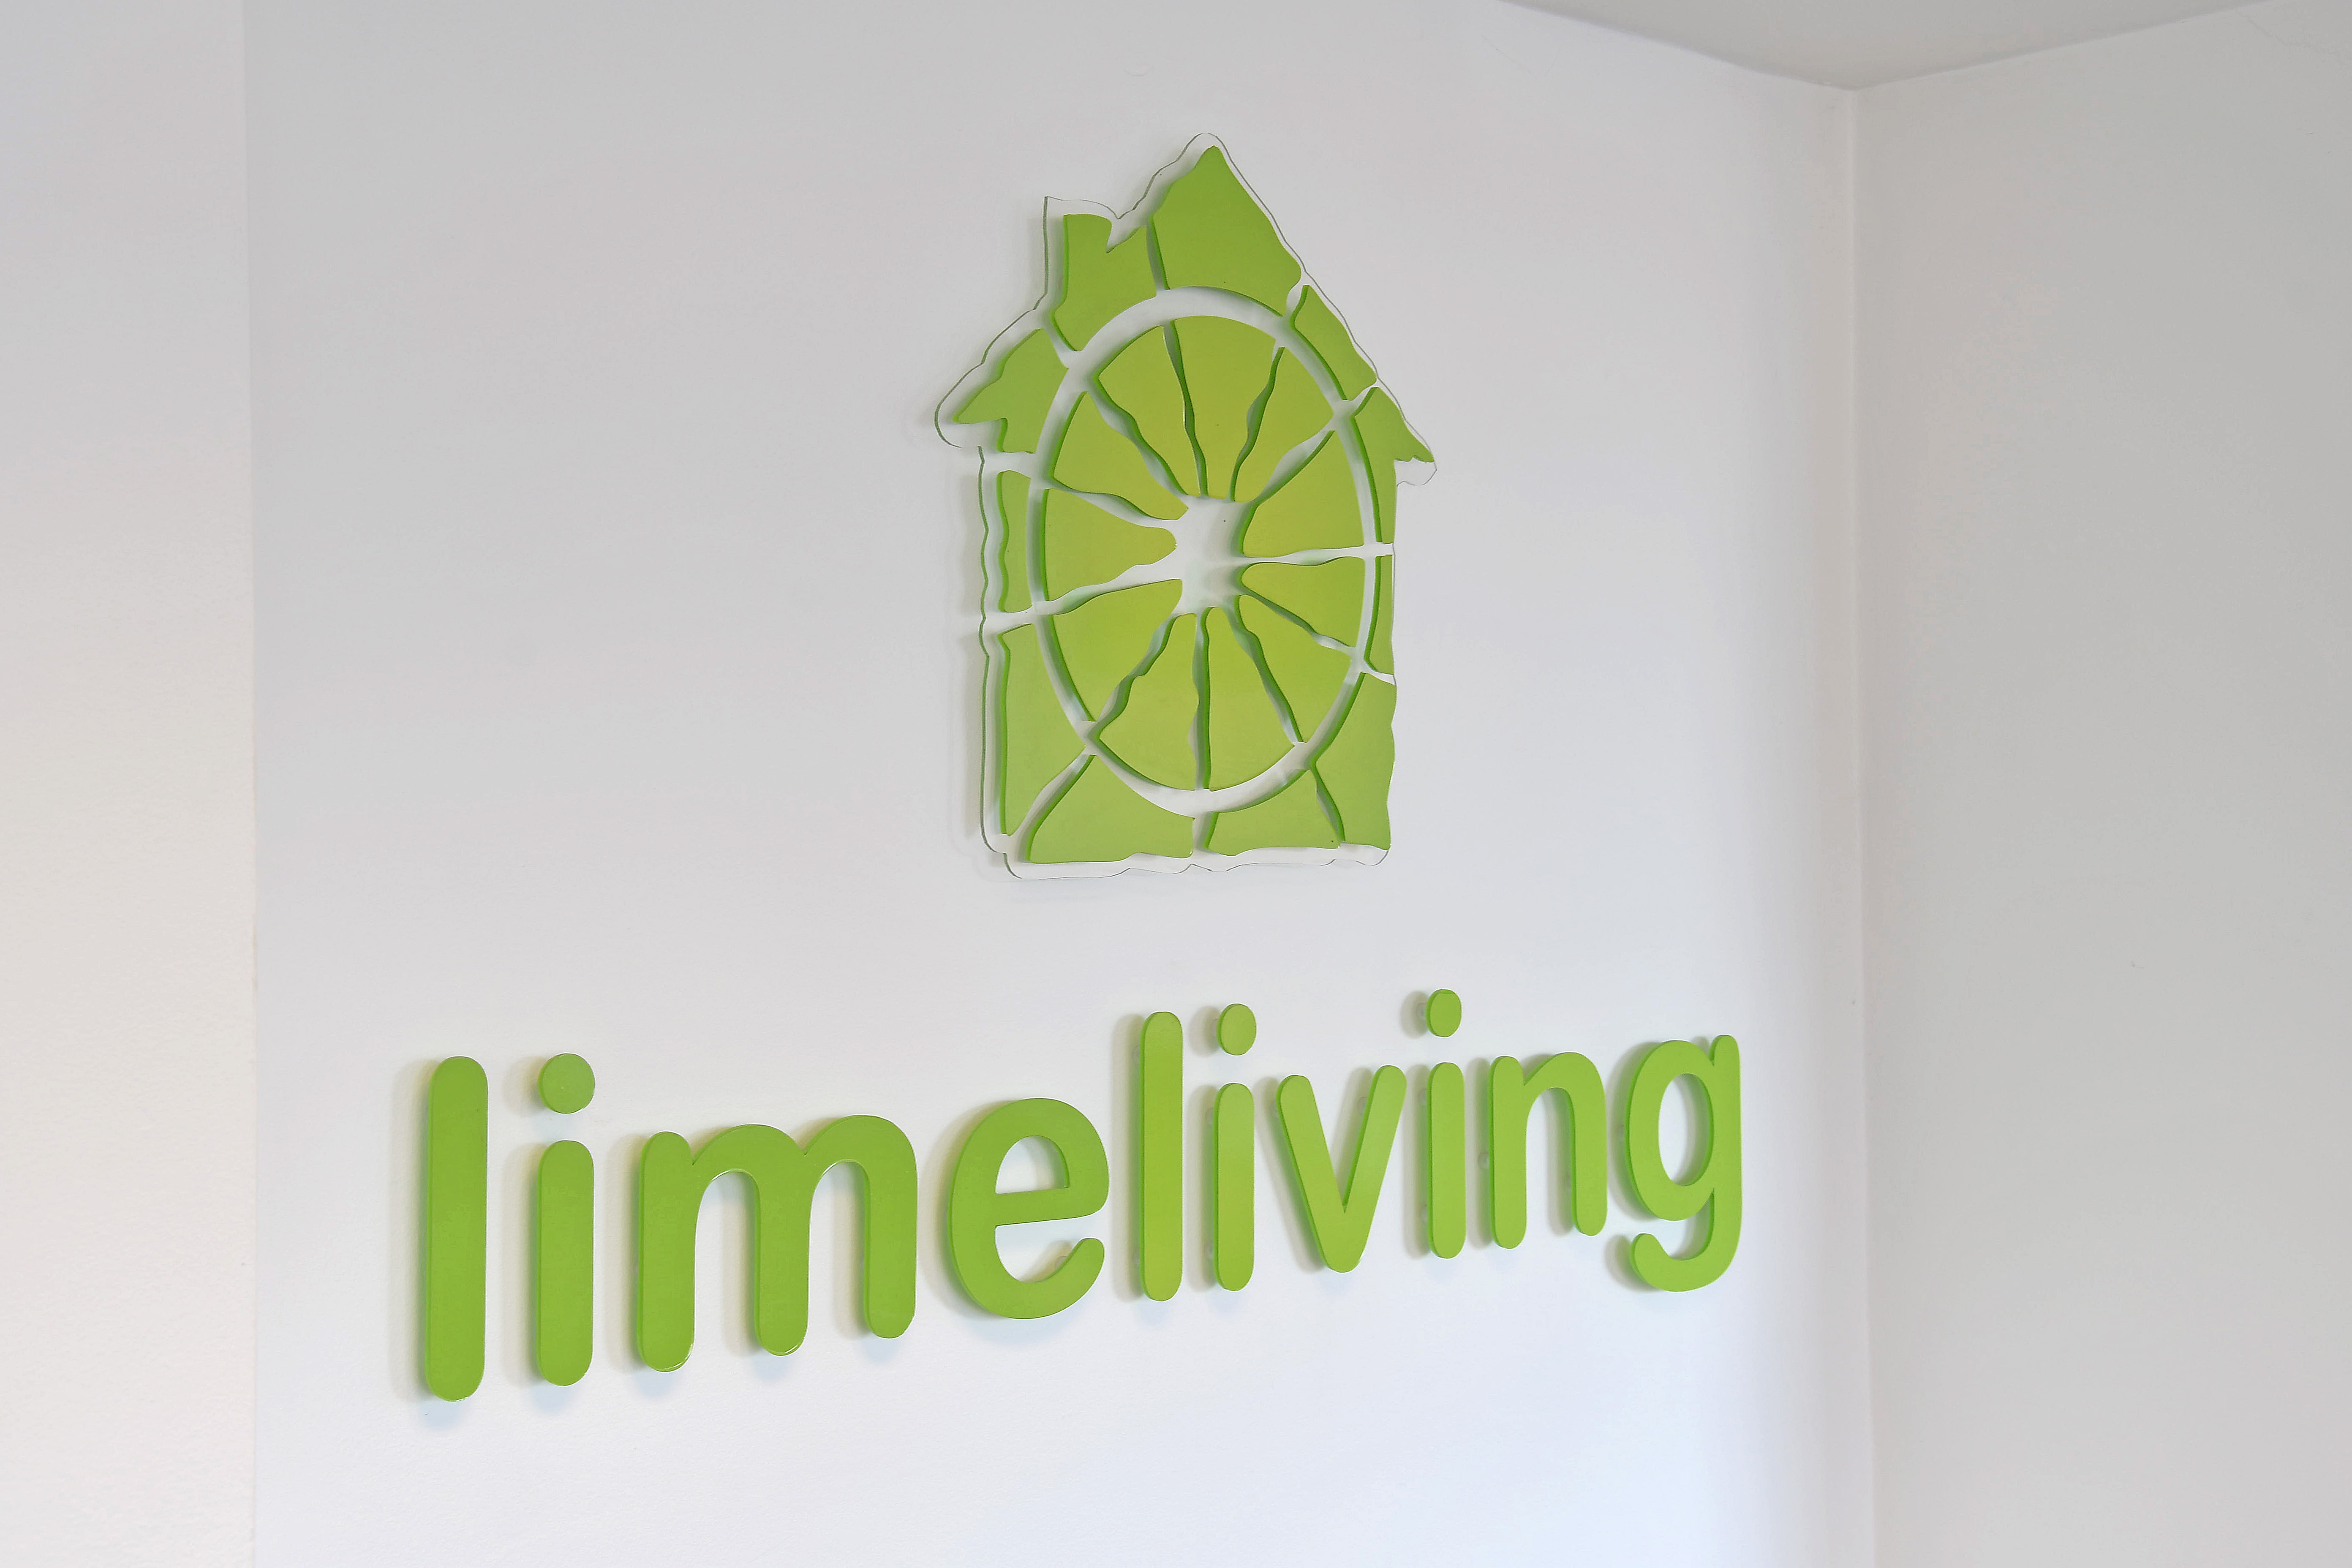 About lime living